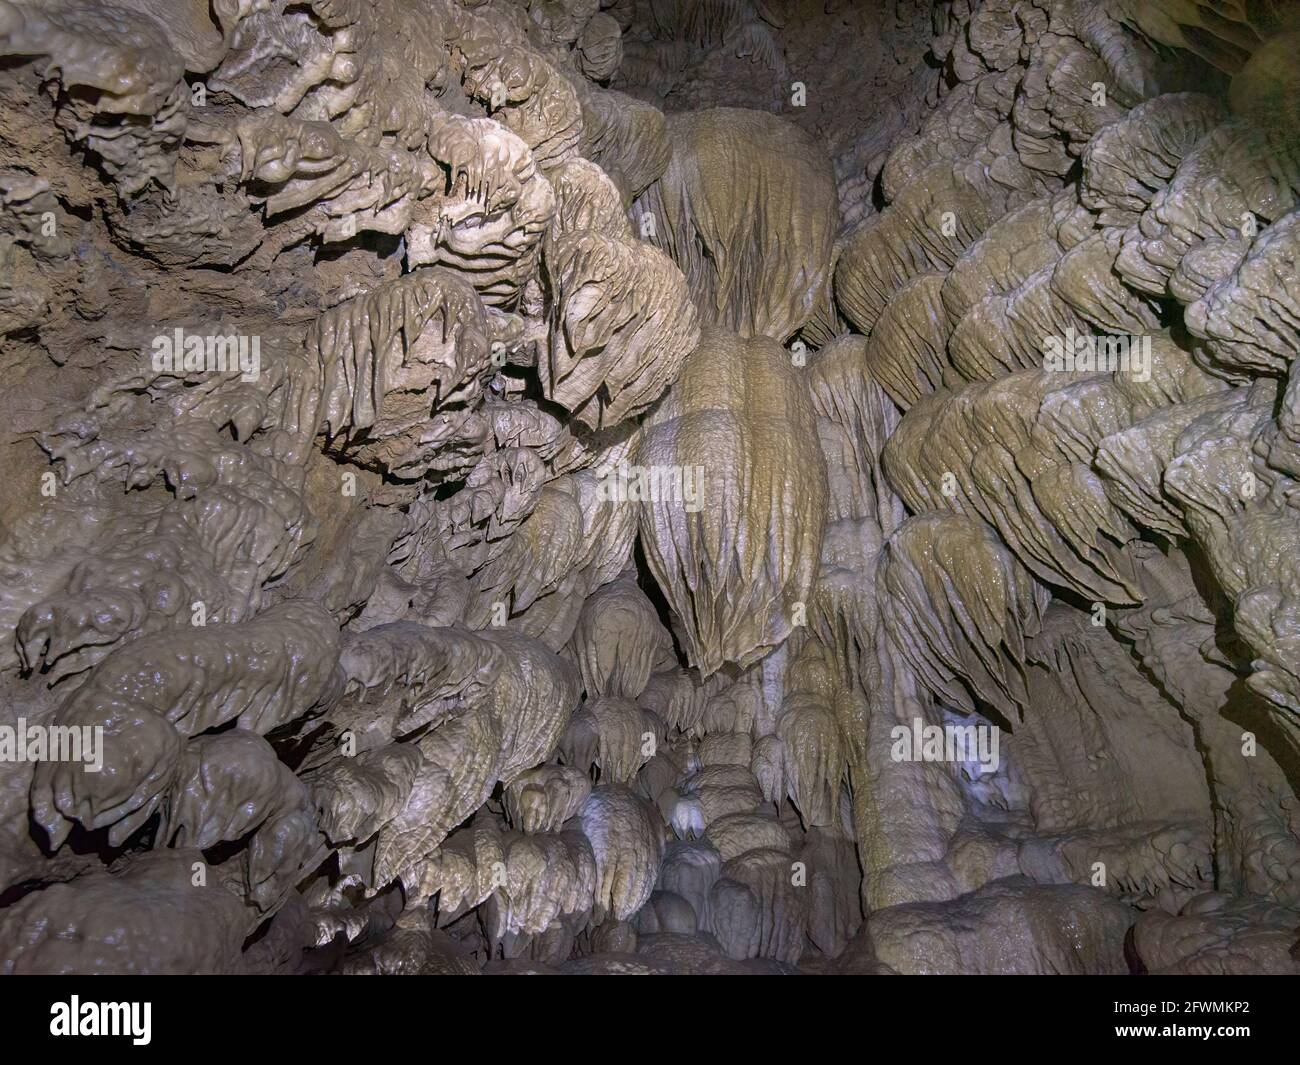 Camera Paradise Lost all'Oregon Caves National Monument, Oregon meridionale. Foto Stock